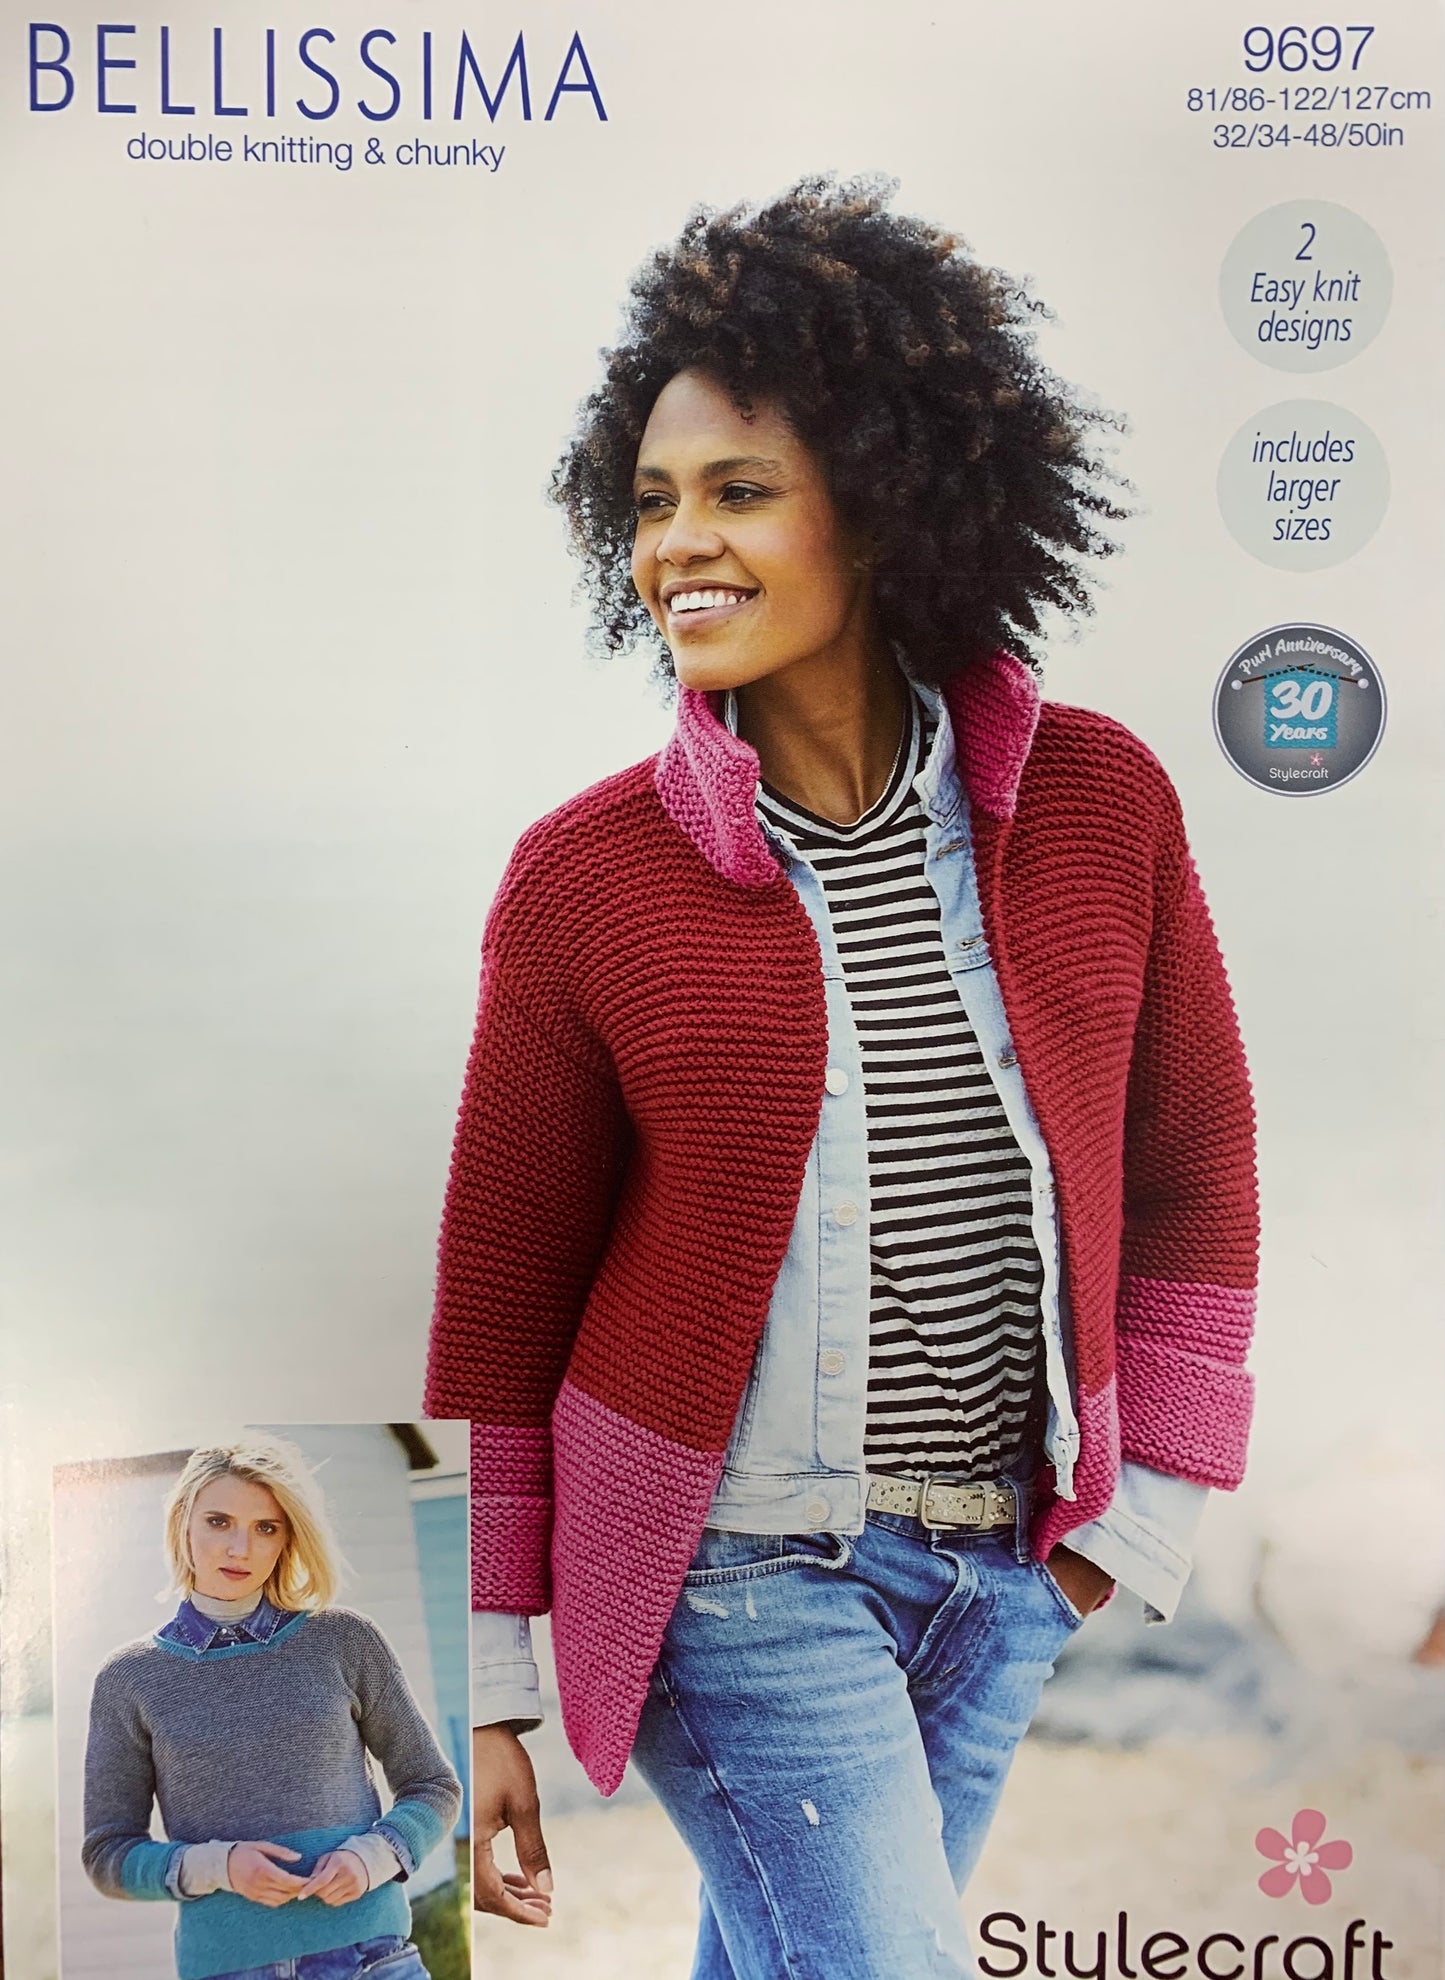 9697 Stylecraft Bellissima dk and chunky ladies jacket and jumper knitting pattern